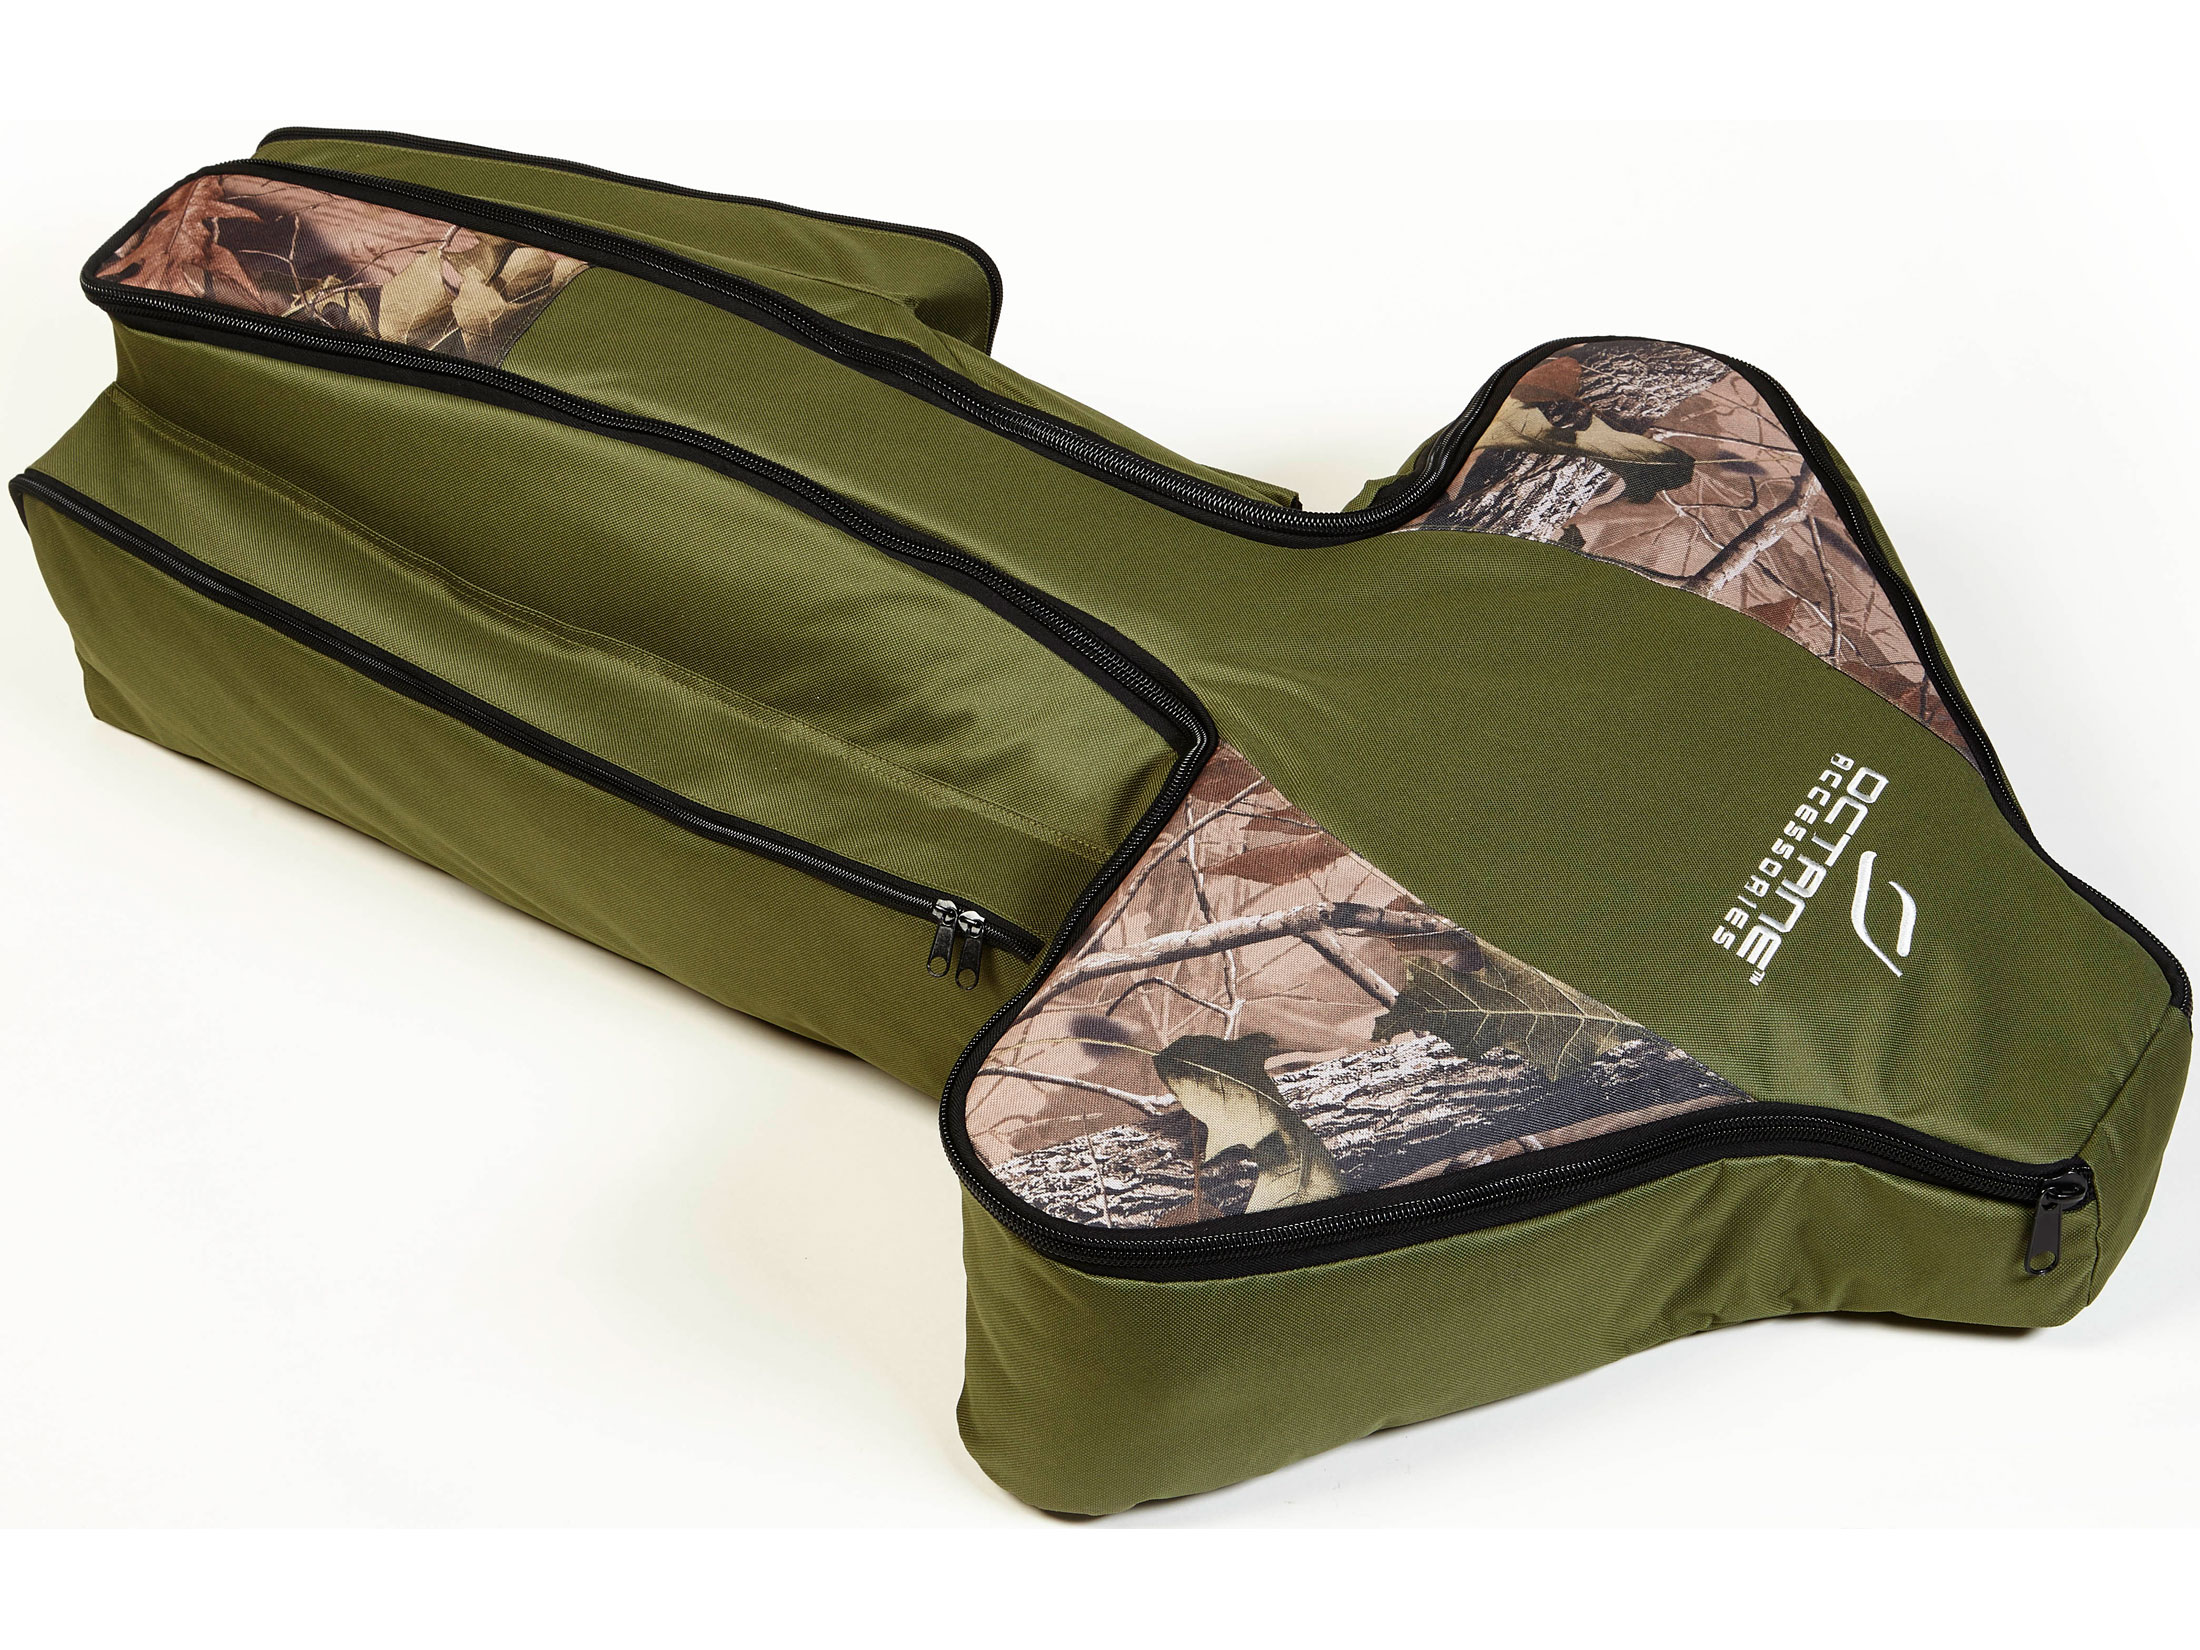 The CenterPoint Crossbow Case